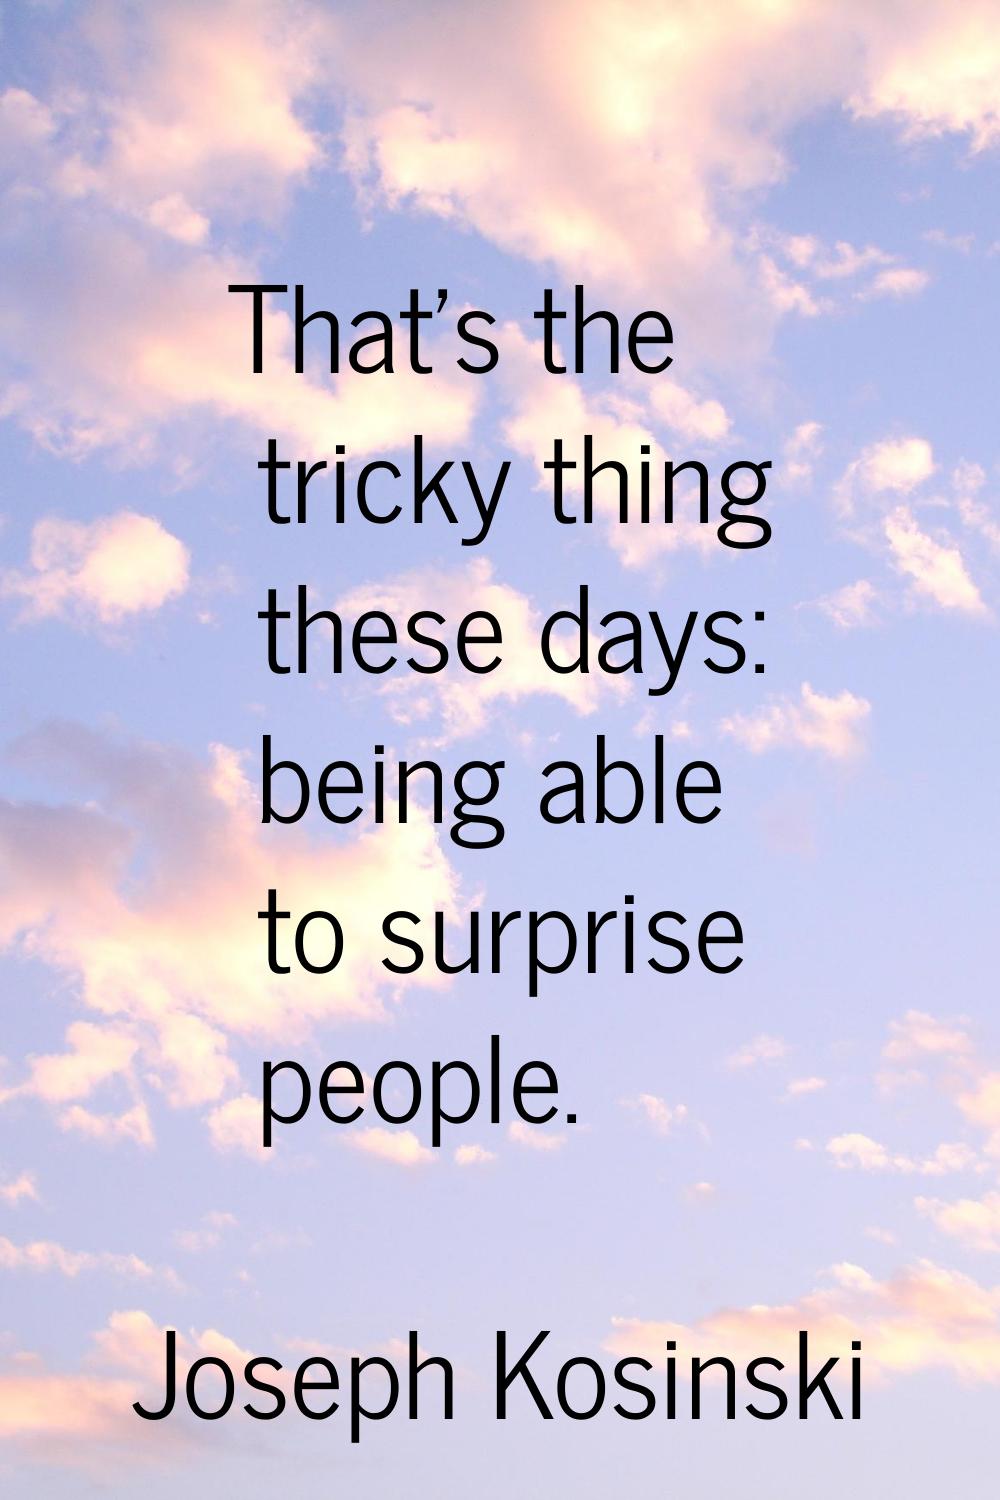 That's the tricky thing these days: being able to surprise people.